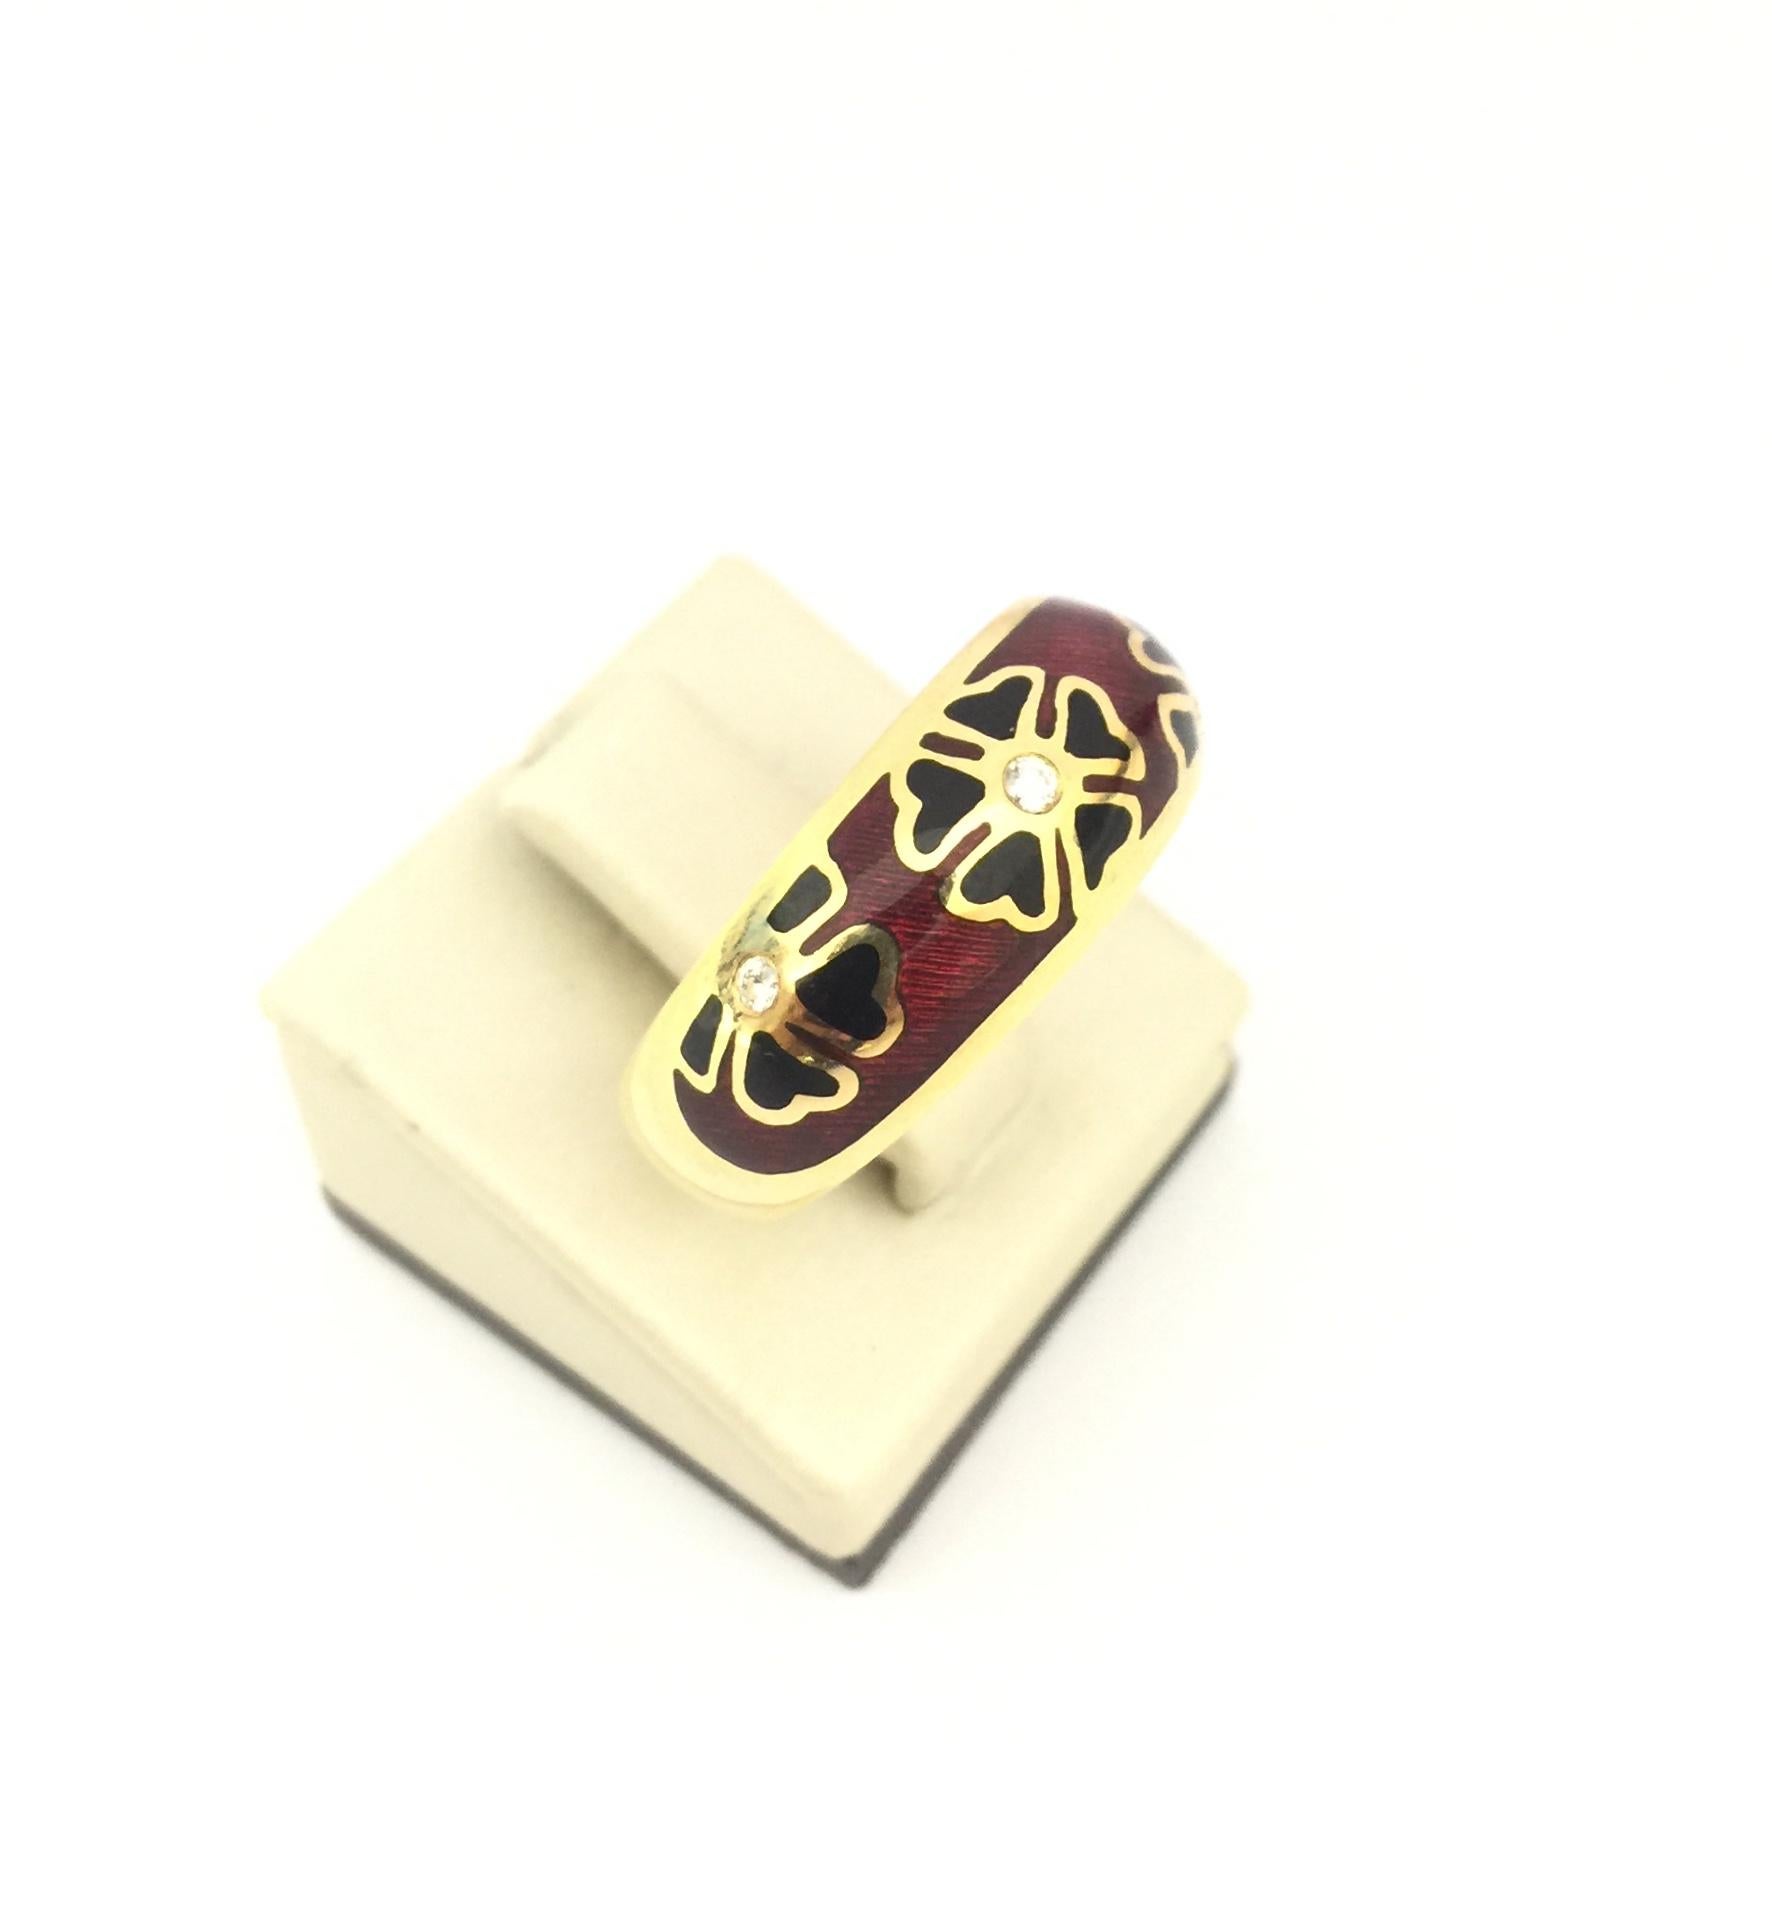 Faberge Woman's Ring.
18k Yellow Gold 
Red and Black Enamel
Diamonds 0.045cts
Size 7
F2422N4